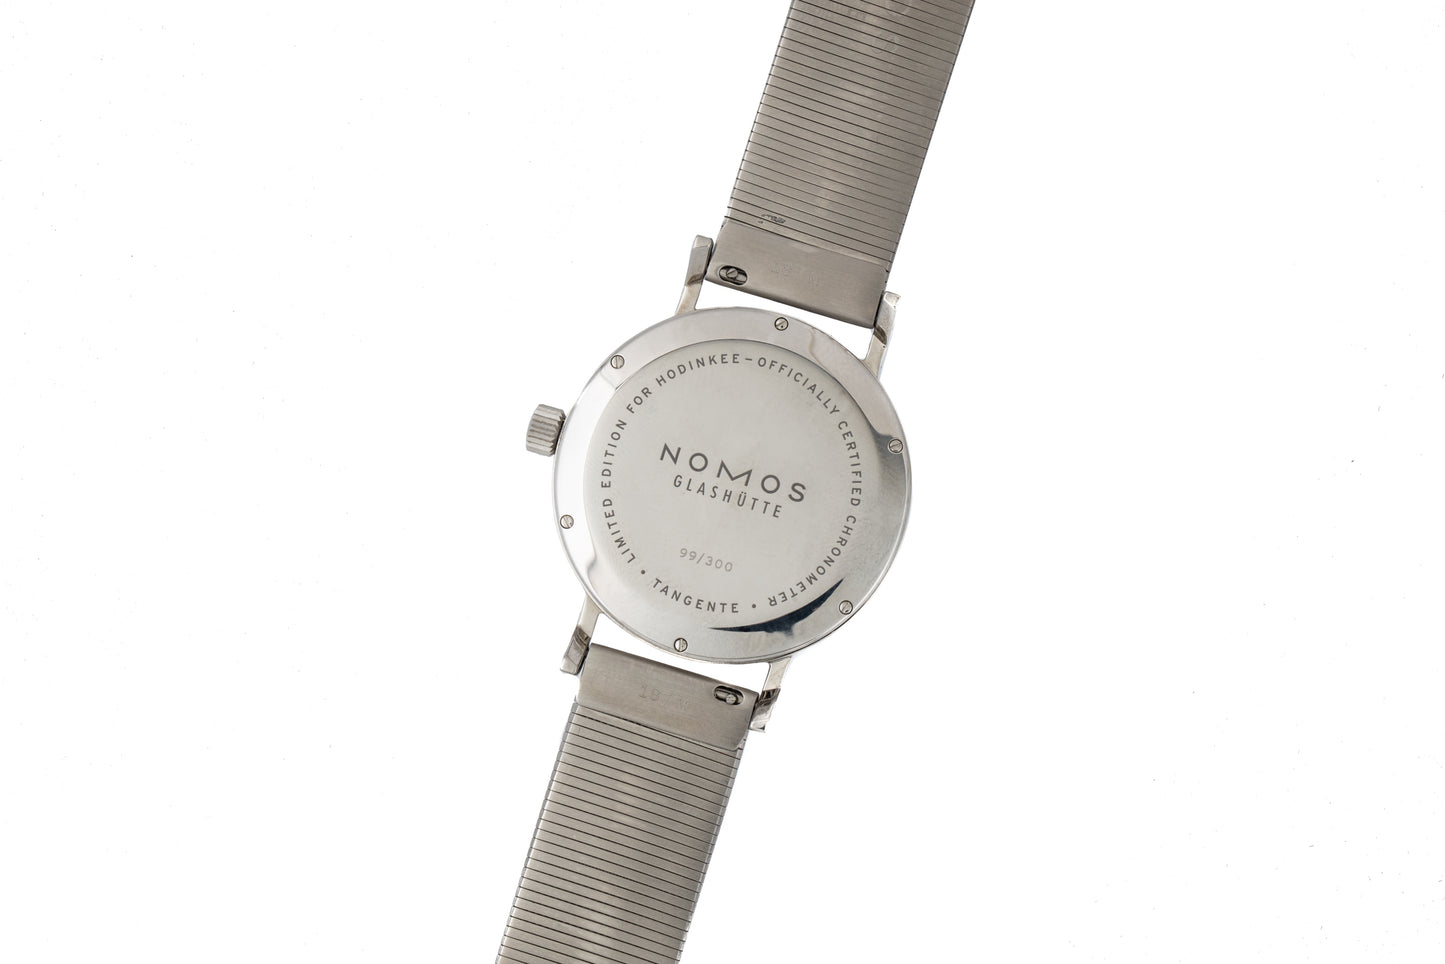 Nomos Tangente Sport Limited Edition for HODINKEE